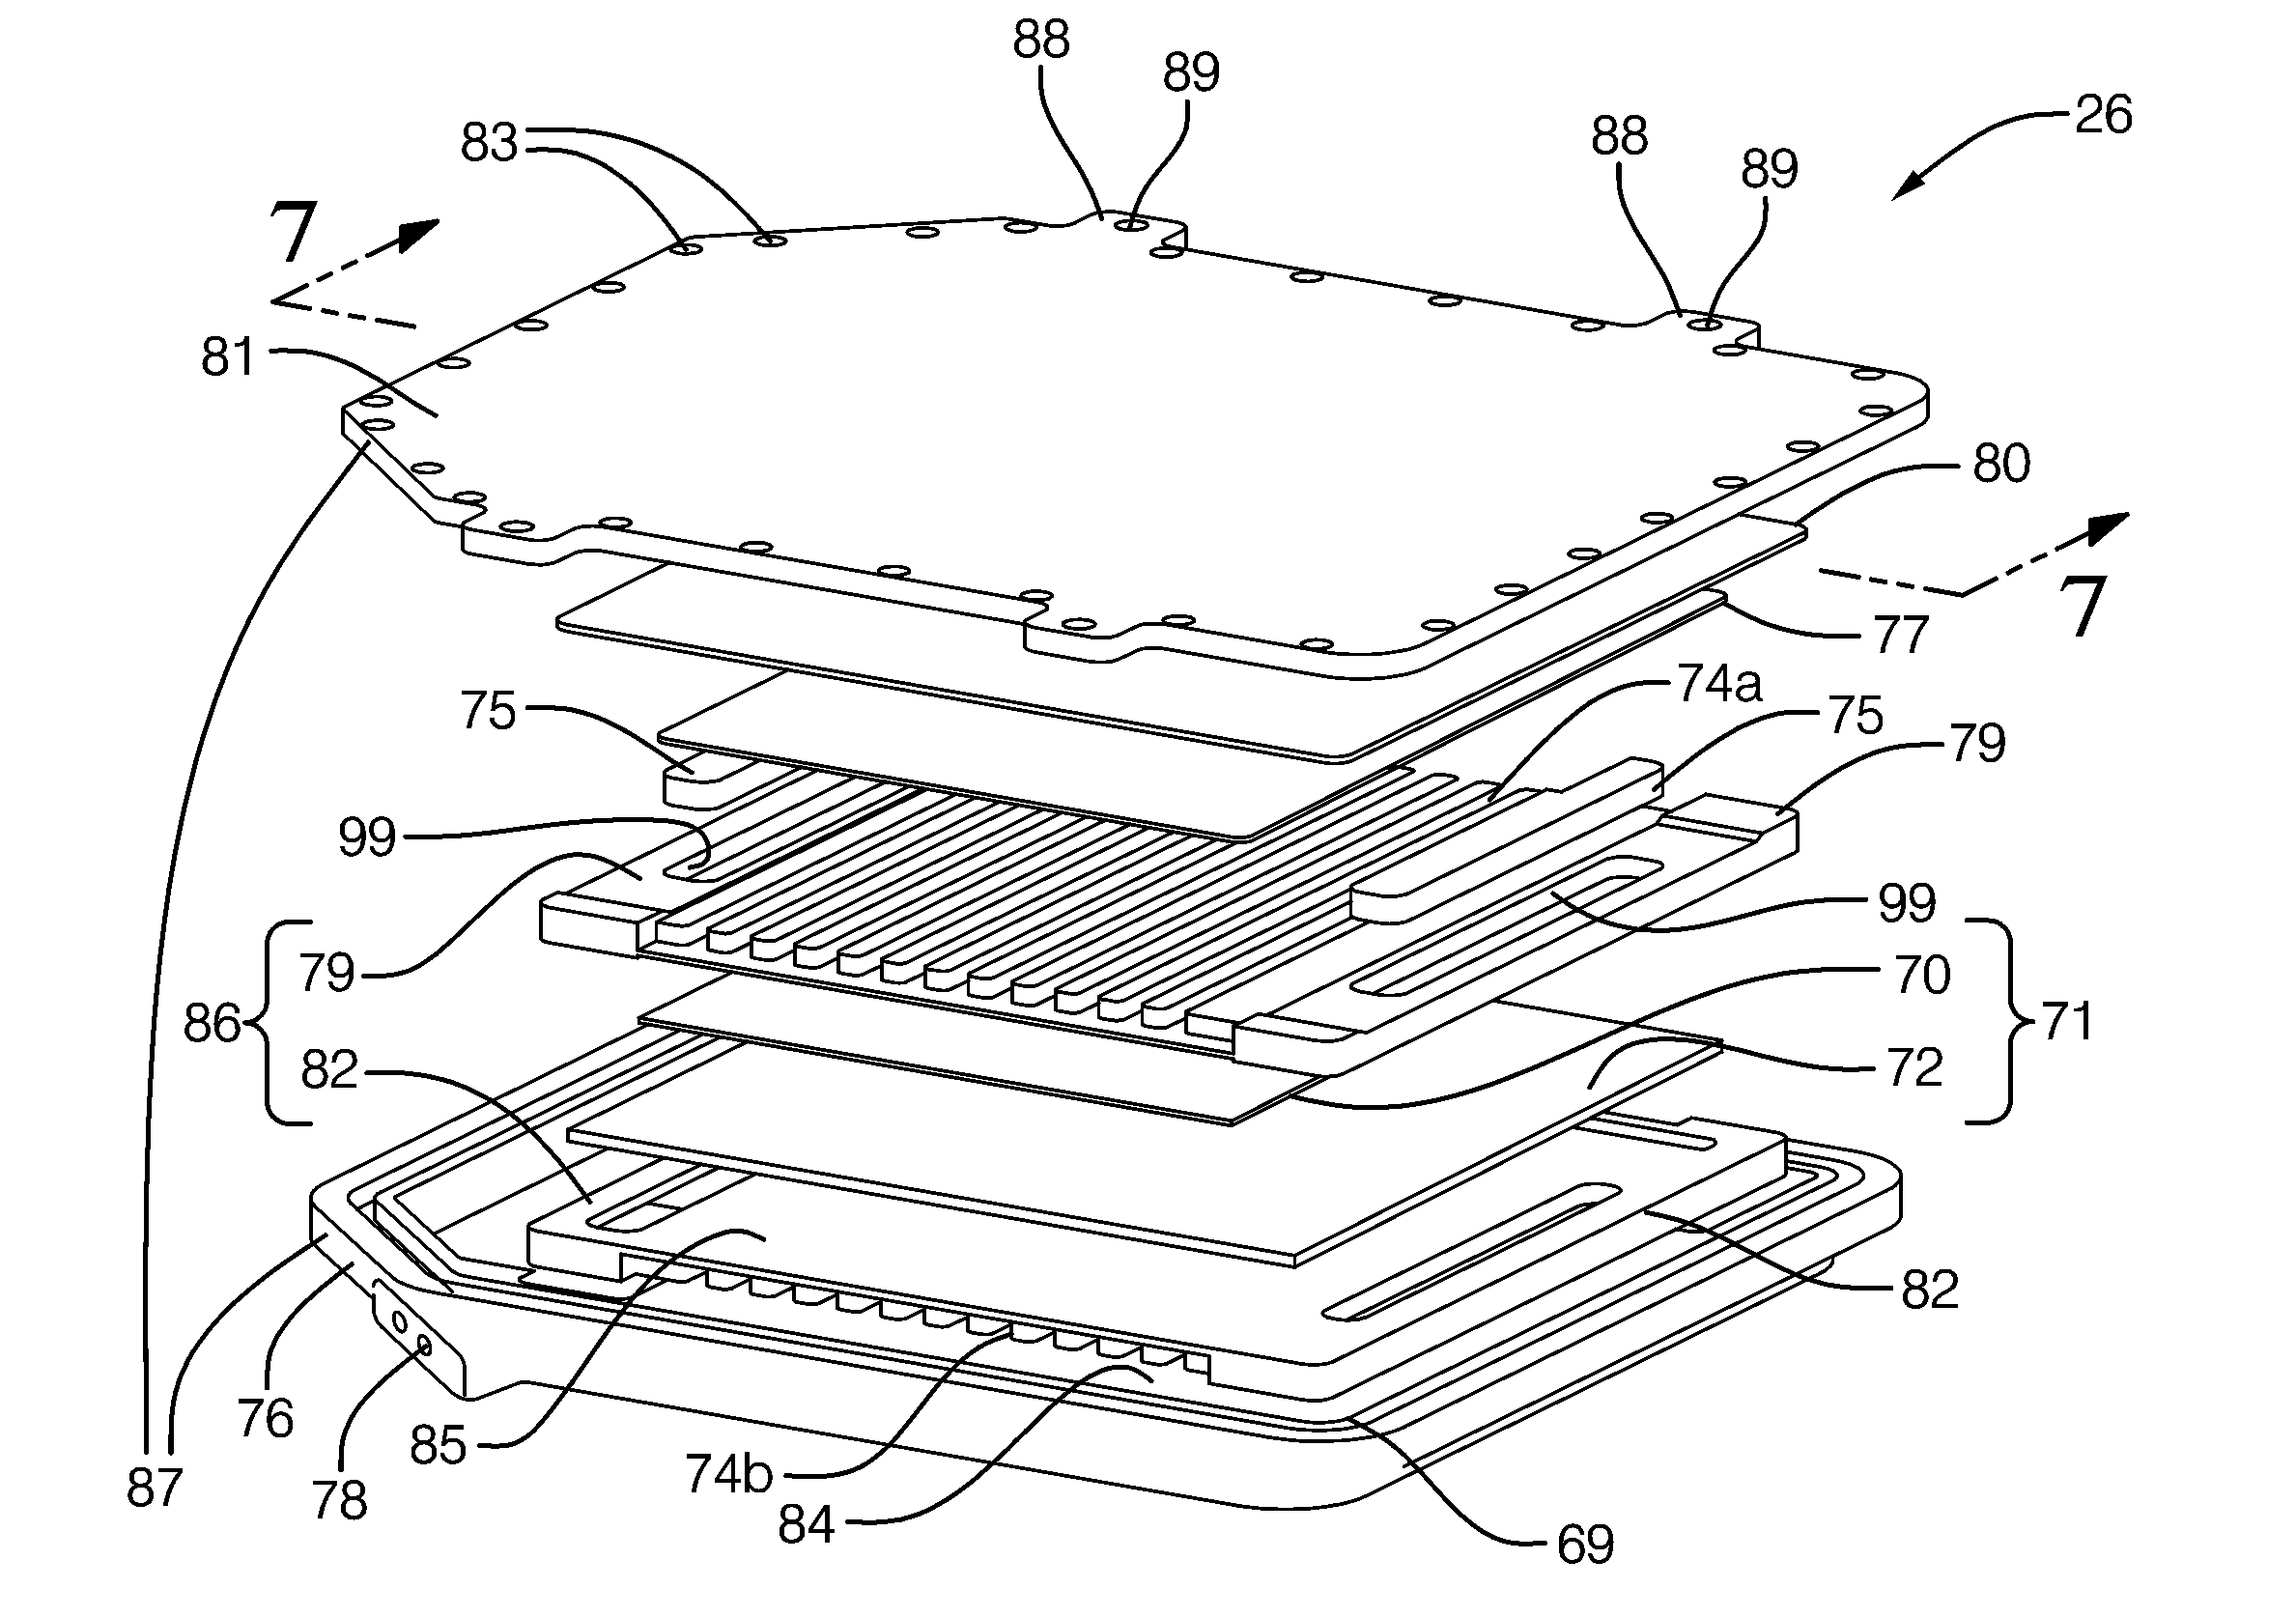 Coil apparatus having coil arrangement that includes a ferrite layer and a thermally-conductive silicone layer